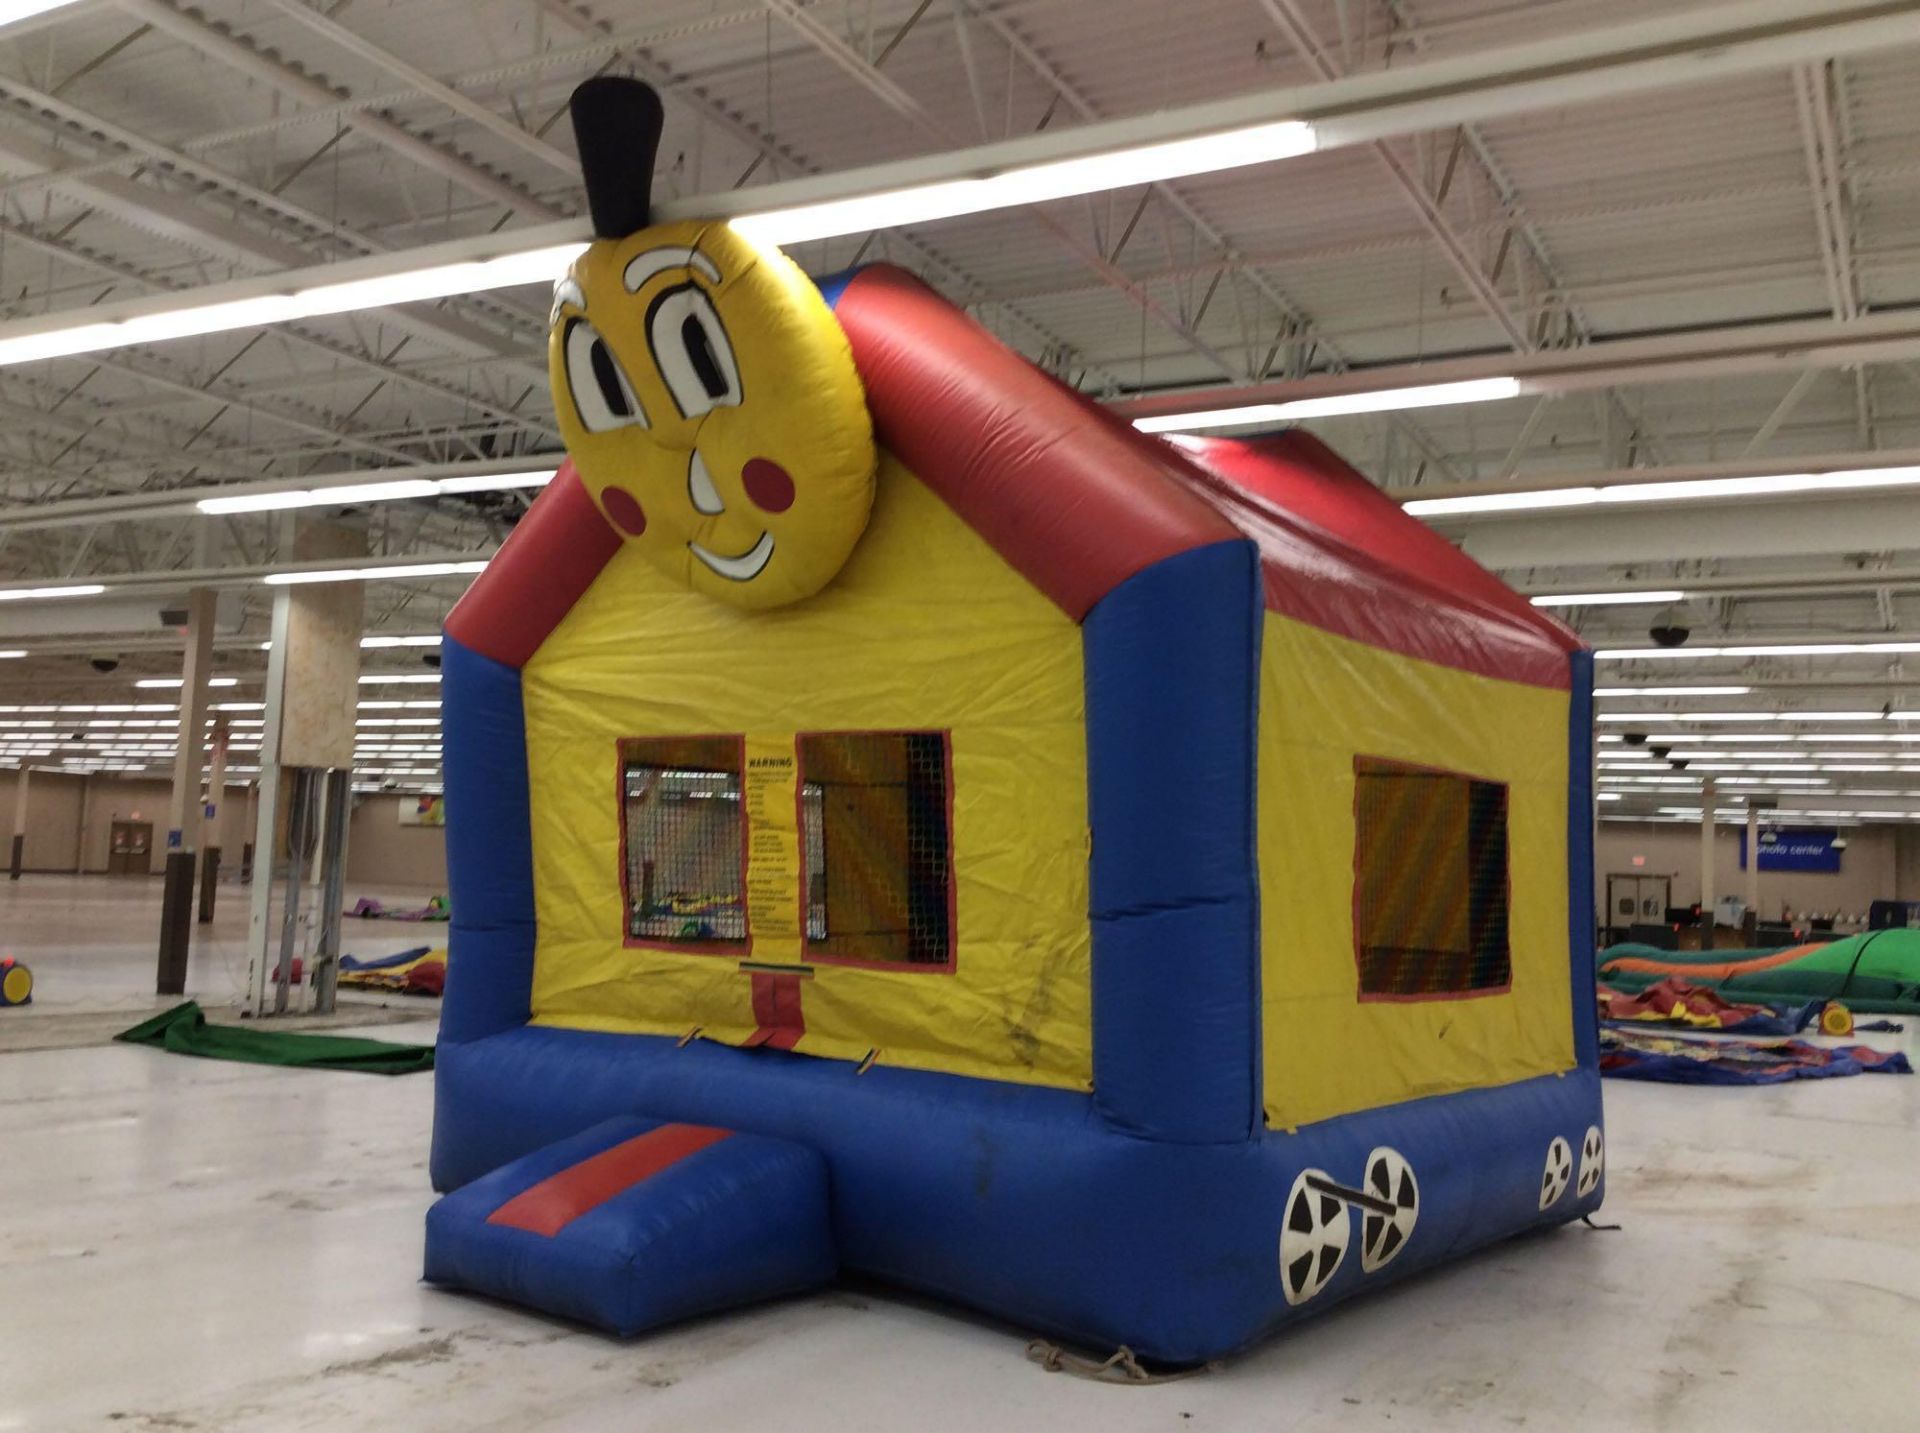 15' x 15' inflatable bounce house train, with blower